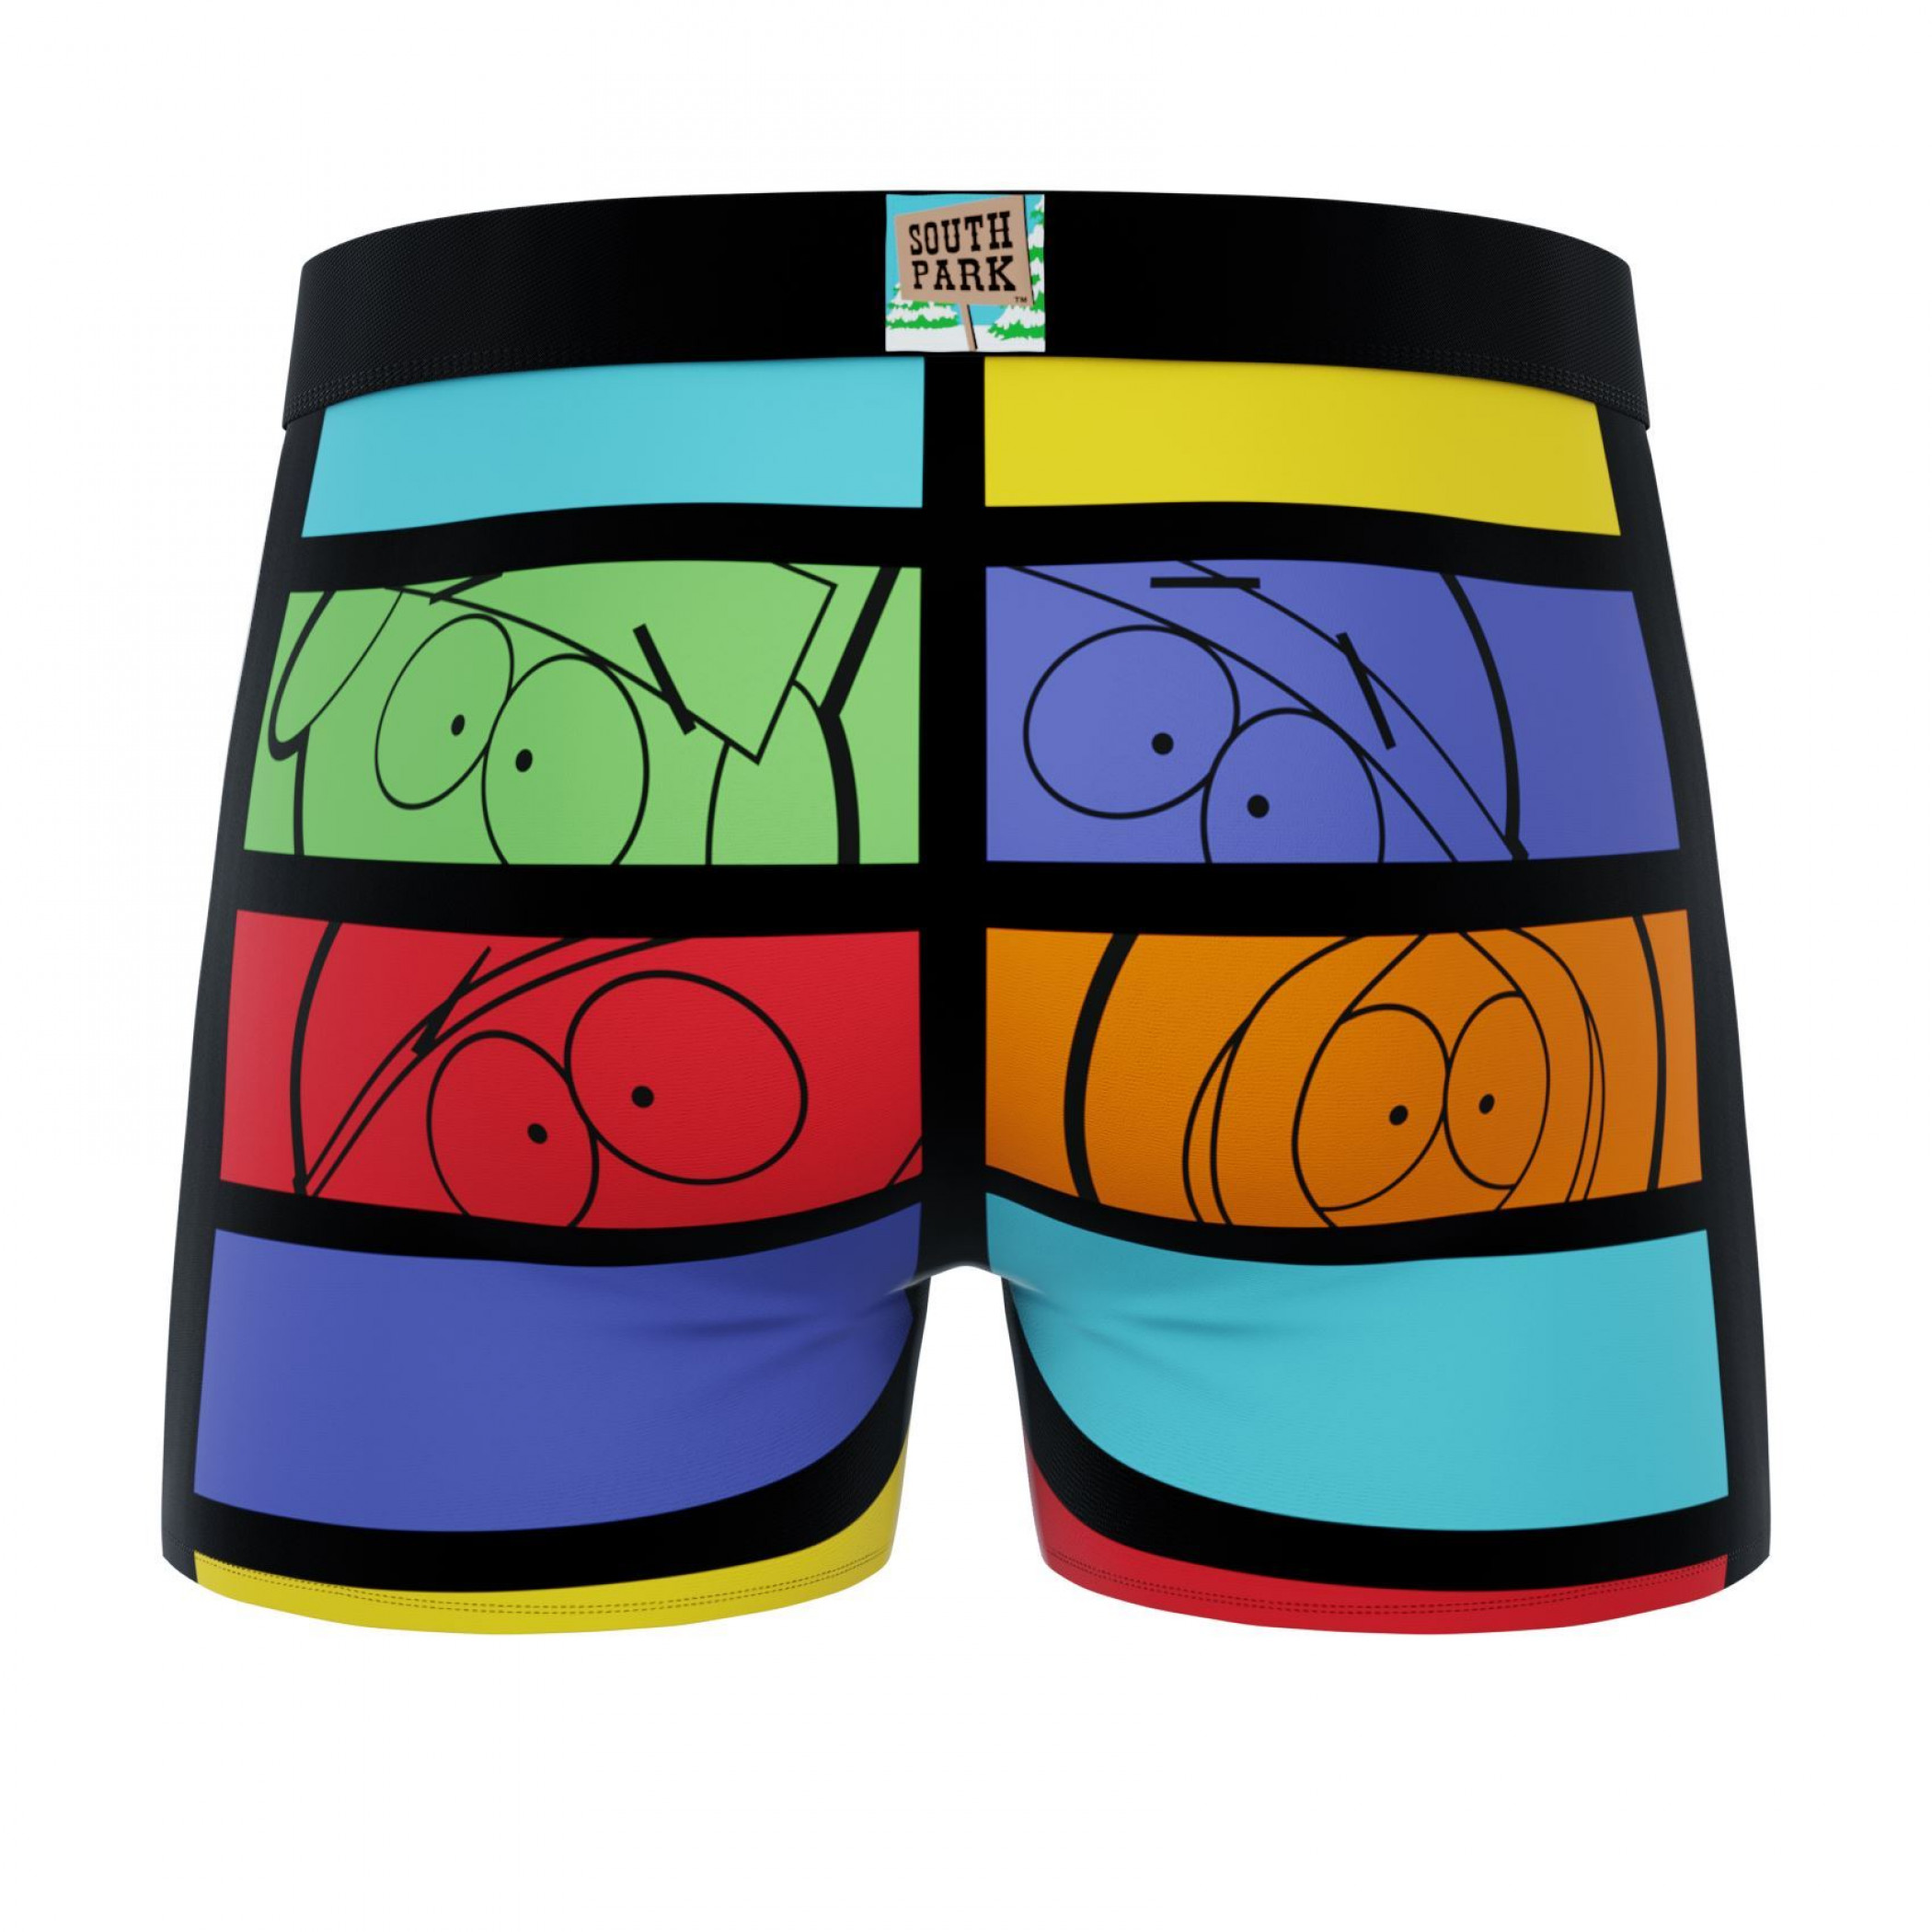 Crazy Boxers South Park Cheesy Poofs Boxer Briefs in Chips Bag